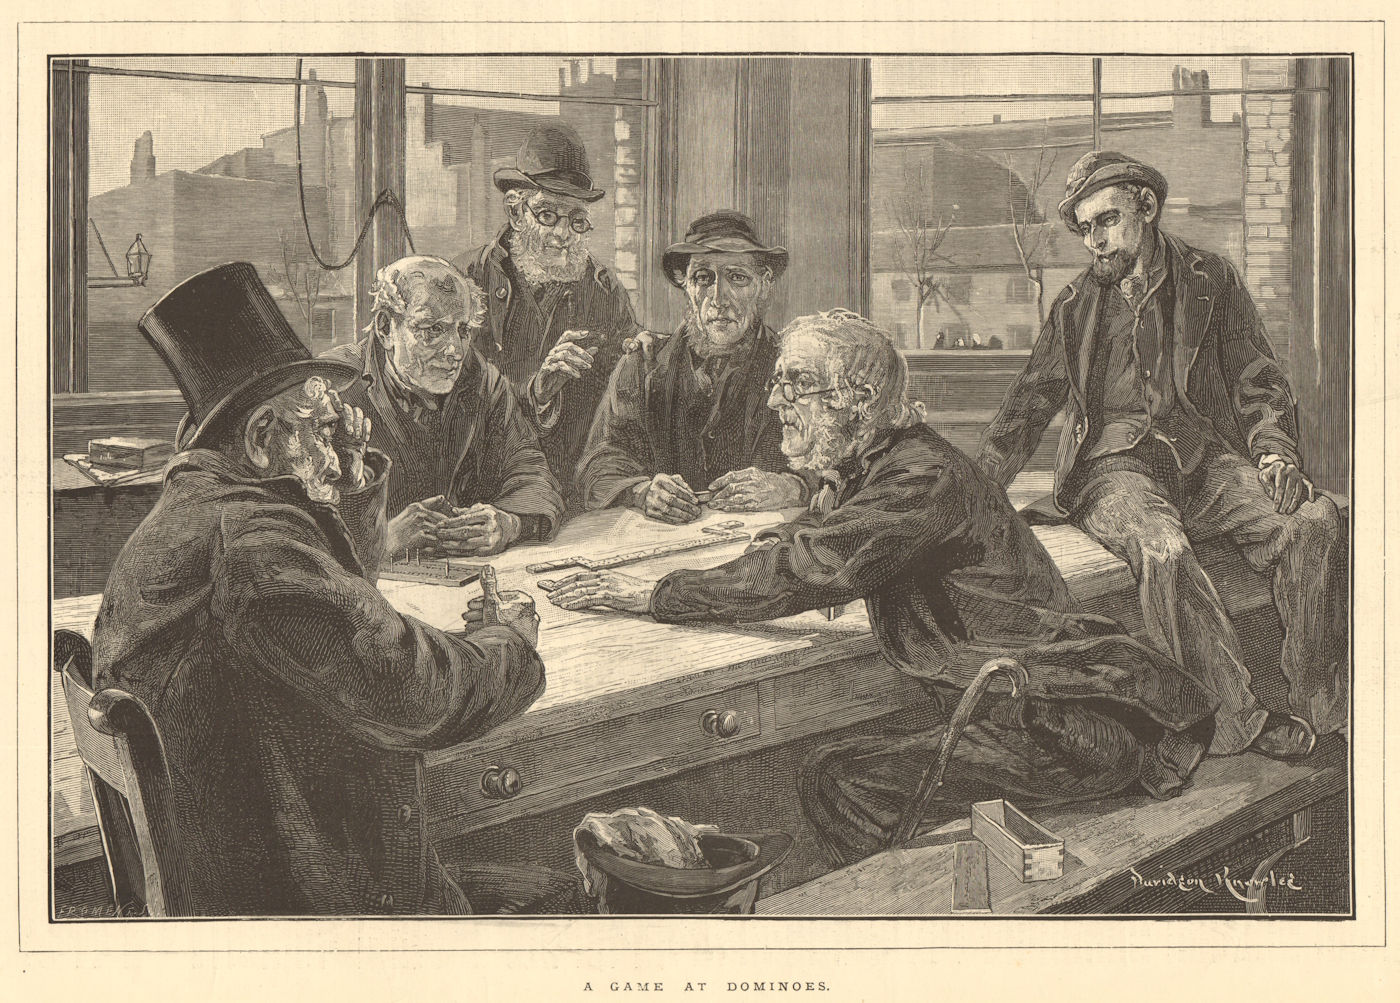 Associate Product A game at dominoes. Society 1883 antique ILN full page print